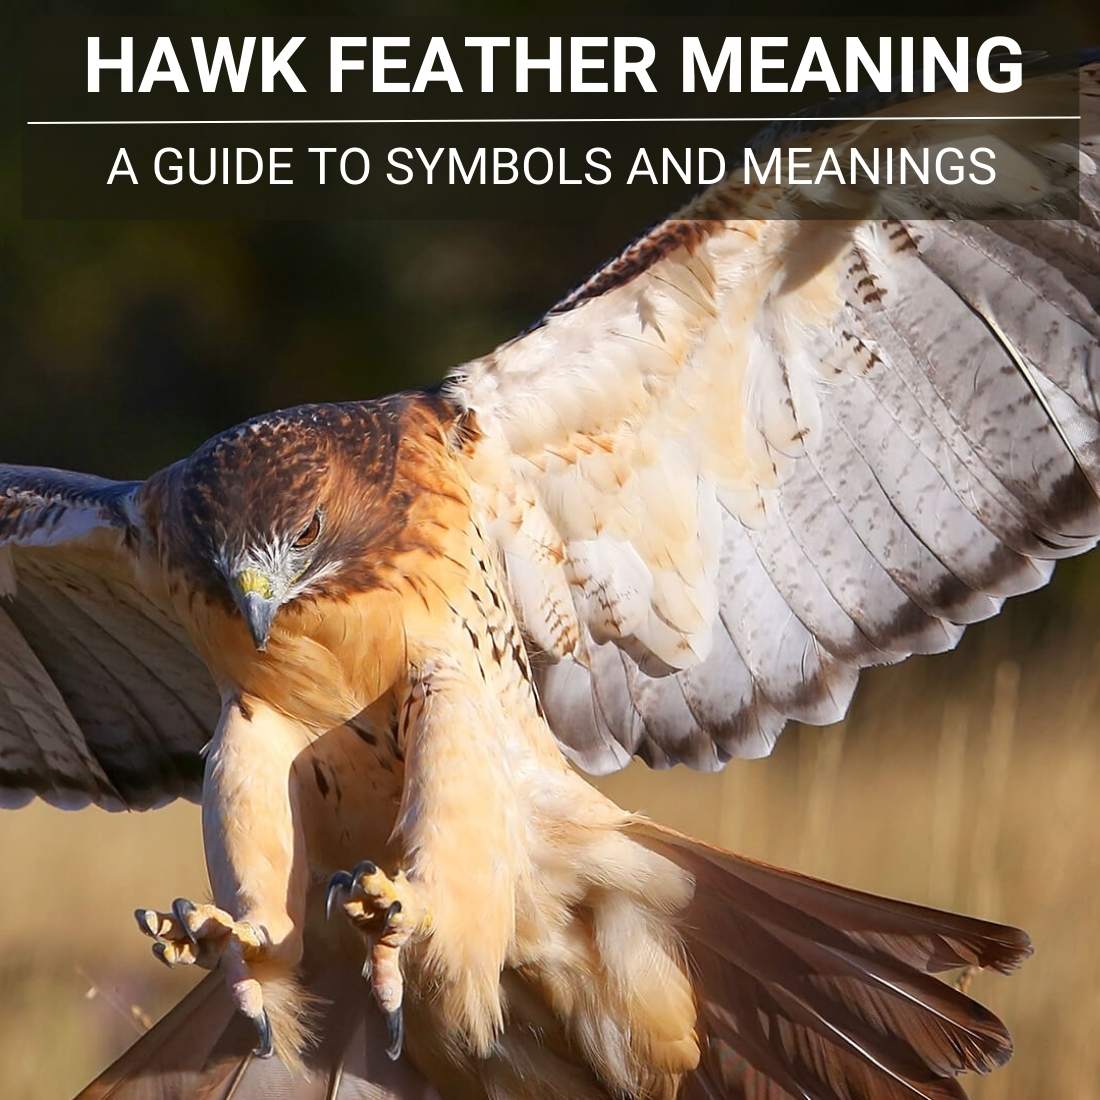 Hawk Feather Meaning